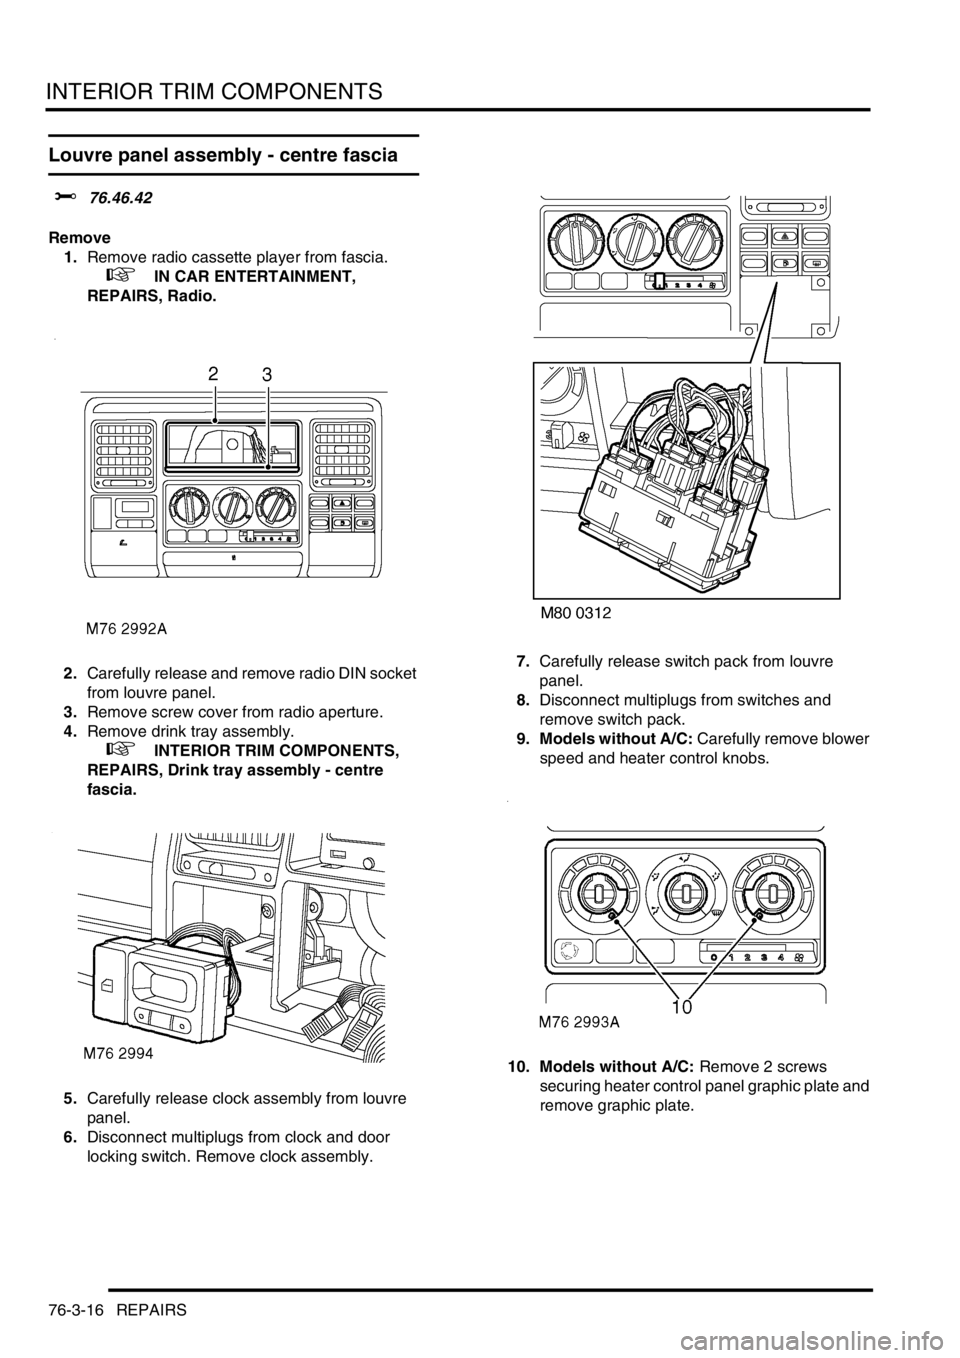 LAND ROVER DISCOVERY 1999  Workshop Manual INTERIOR TRIM COMPONENTS
76-3-16 REPAIRS
Louvre panel assembly - centre fascia
$% 76.46.42
Remove
1.Remove radio cassette player from fascia. 
 
 +  IN CAR ENTERTAINMENT, 
REPAIRS, Radio.
2.Carefully 